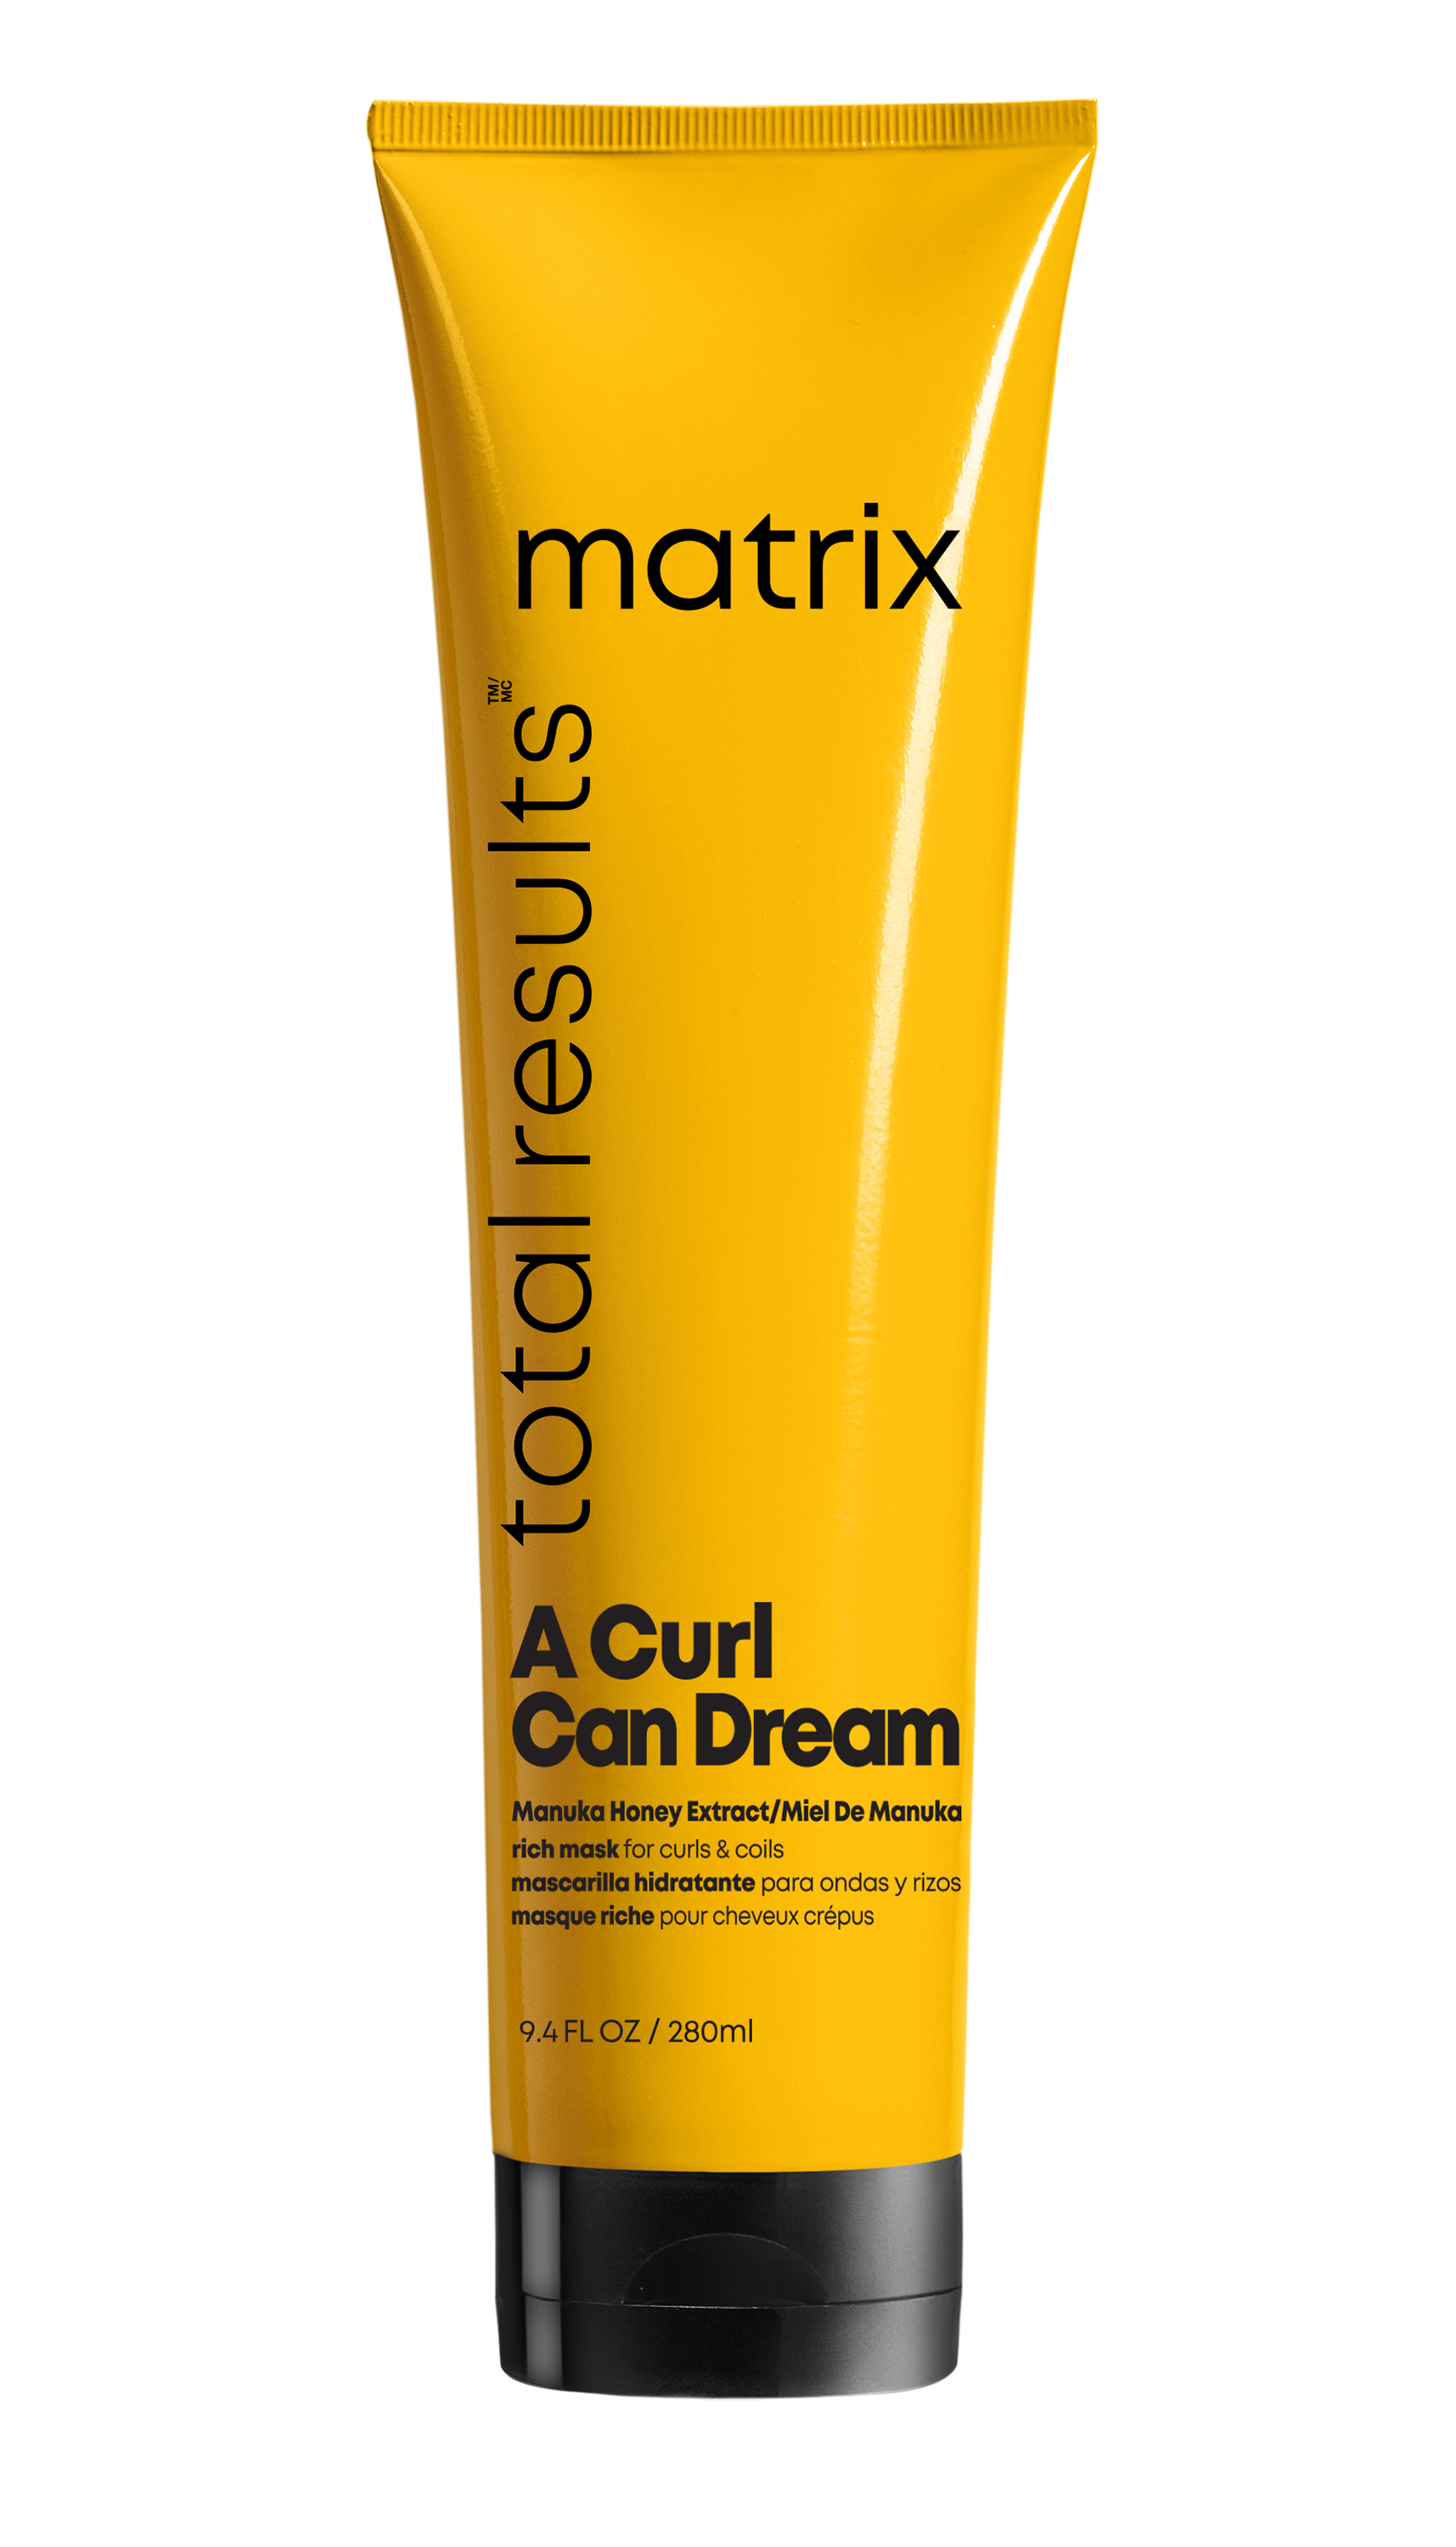 A Curl Can Dream Manuka Honey Extract Rich Mask for curls & coils 19,55*€ - 280ml